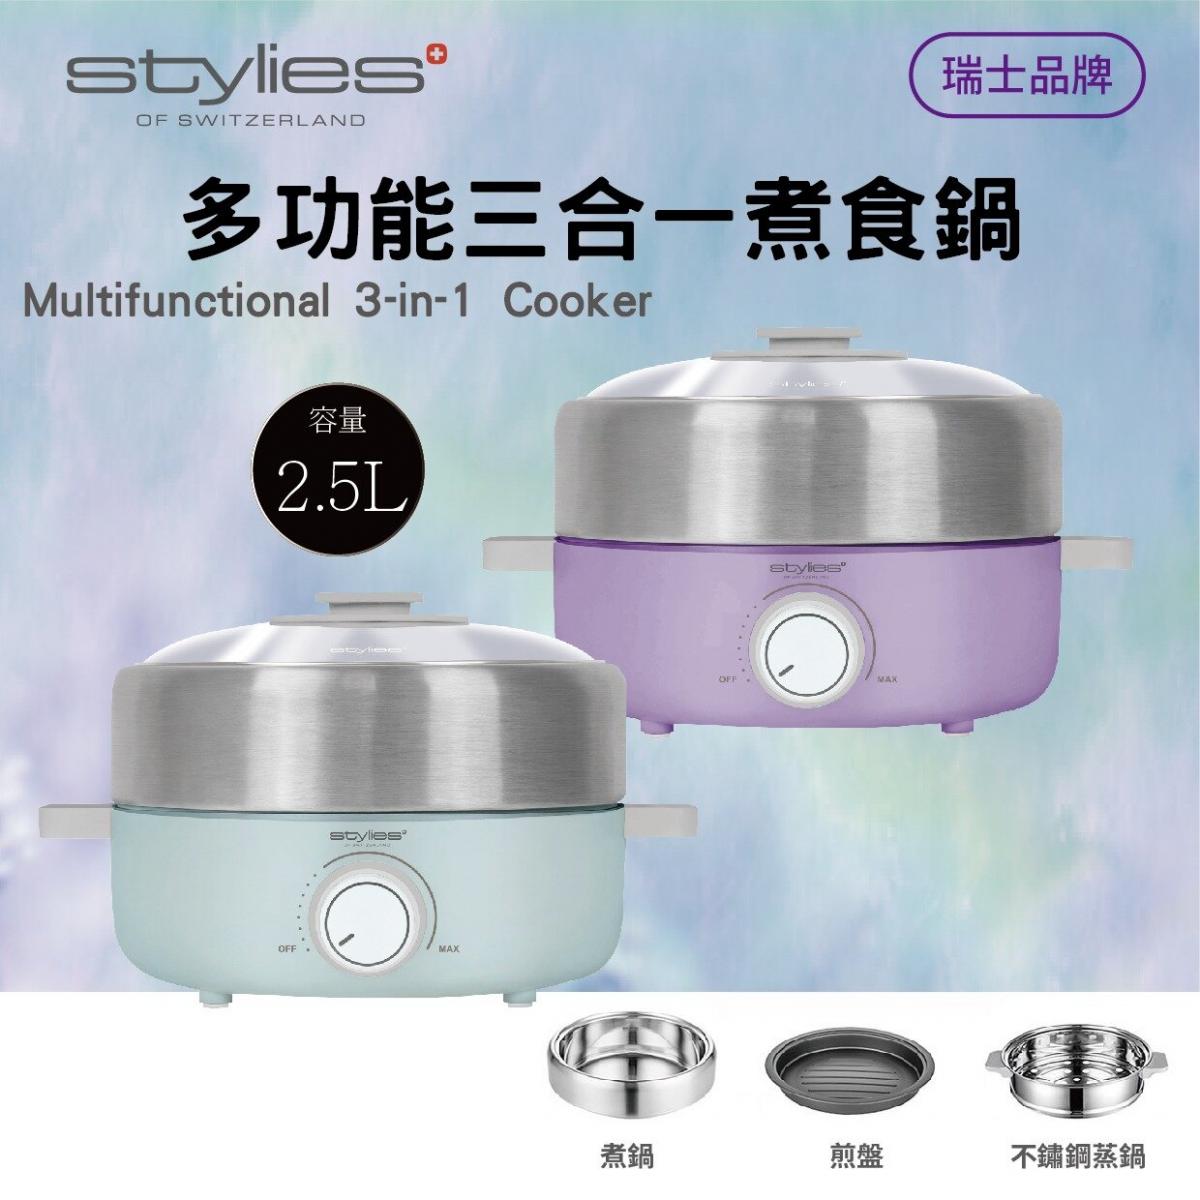 STYLIES - Multifunctional three-in-one cooking pot | Electric steamer | Electric barbecue grill STY-EB100